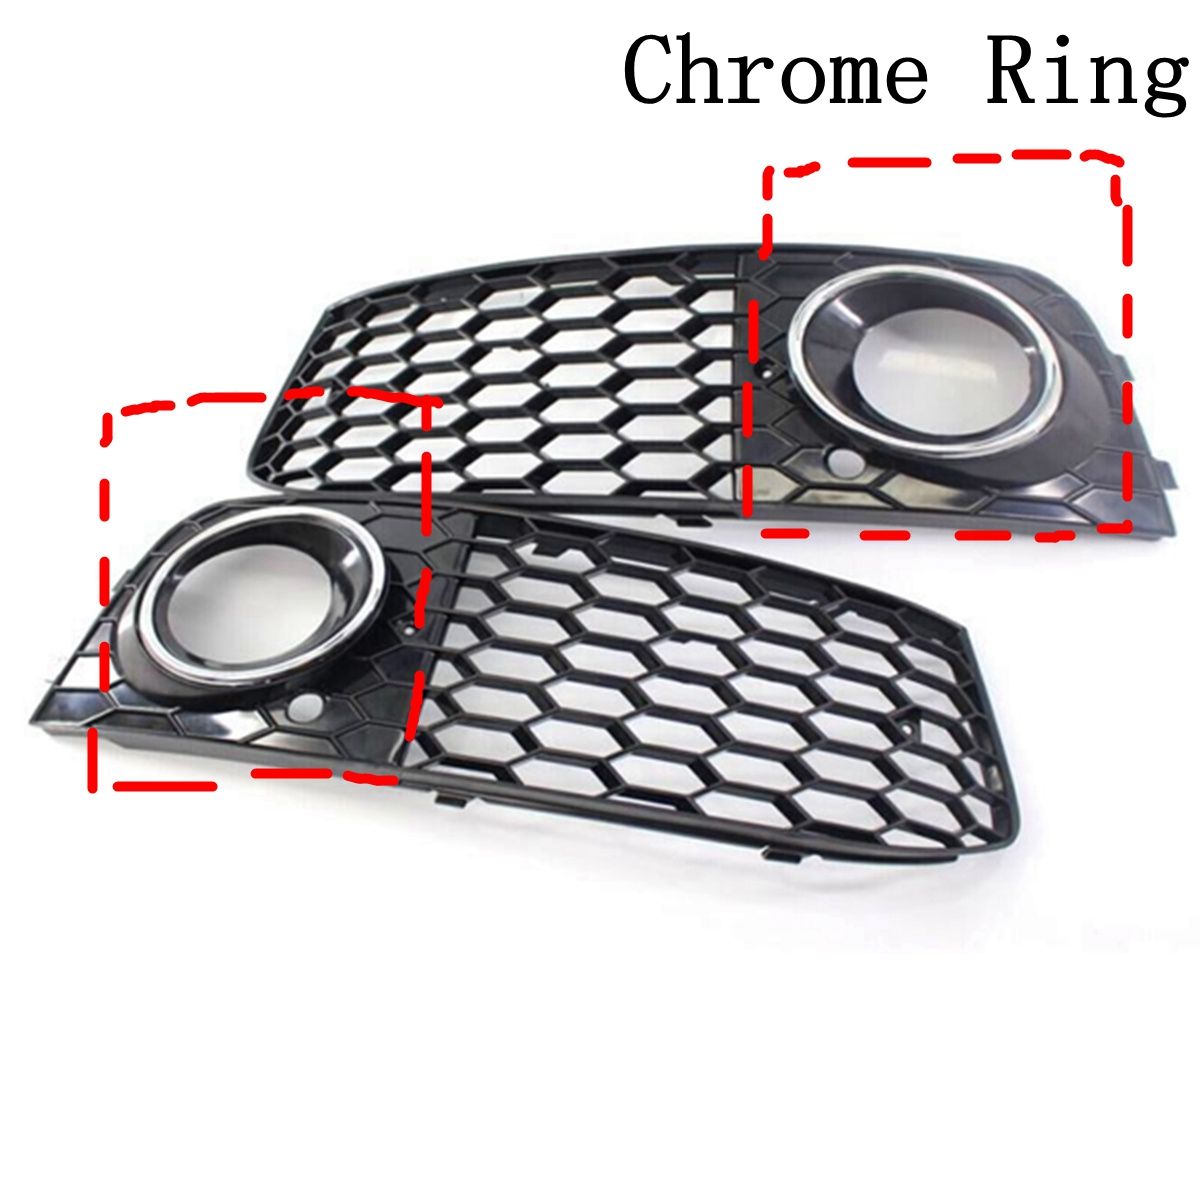 Pair-Glossy-Black-Front-Bumper-Fog-Light-Grille-Grill-Cover-For-Audi-A4-B8-RS4-style-2009-2012-1664521